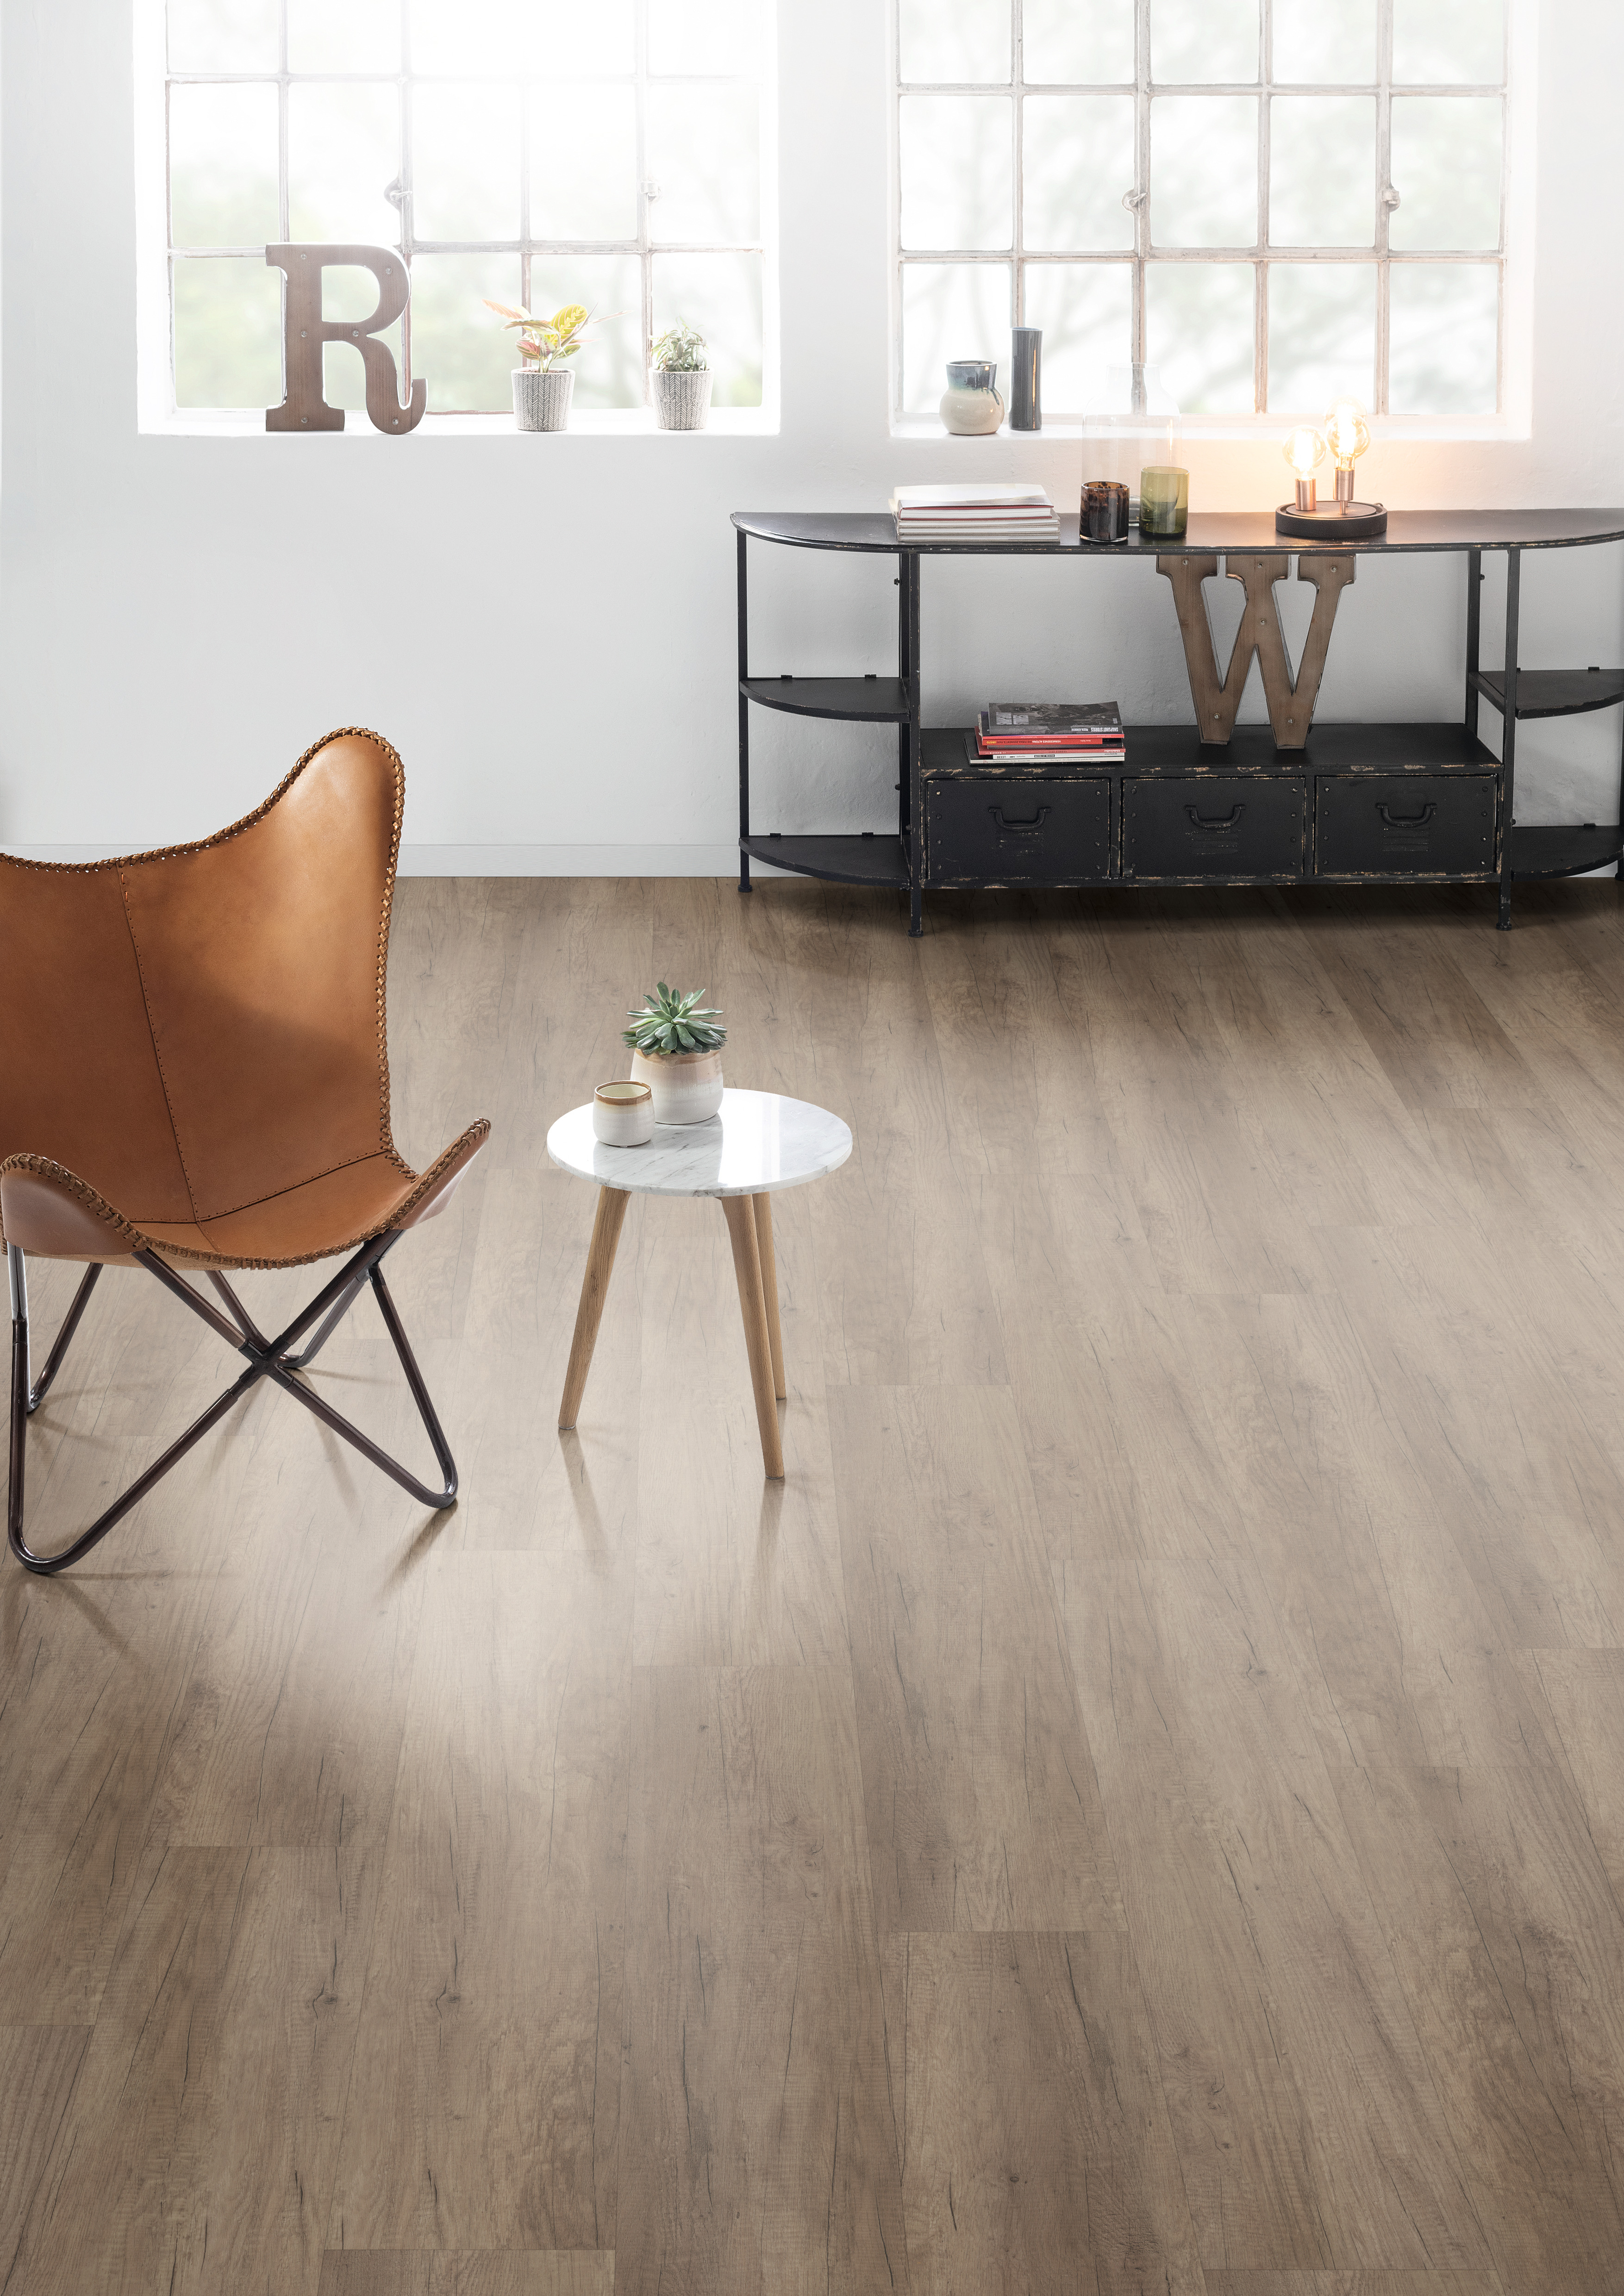 EGGER PRO Flooring Collection 2021+ Image Download